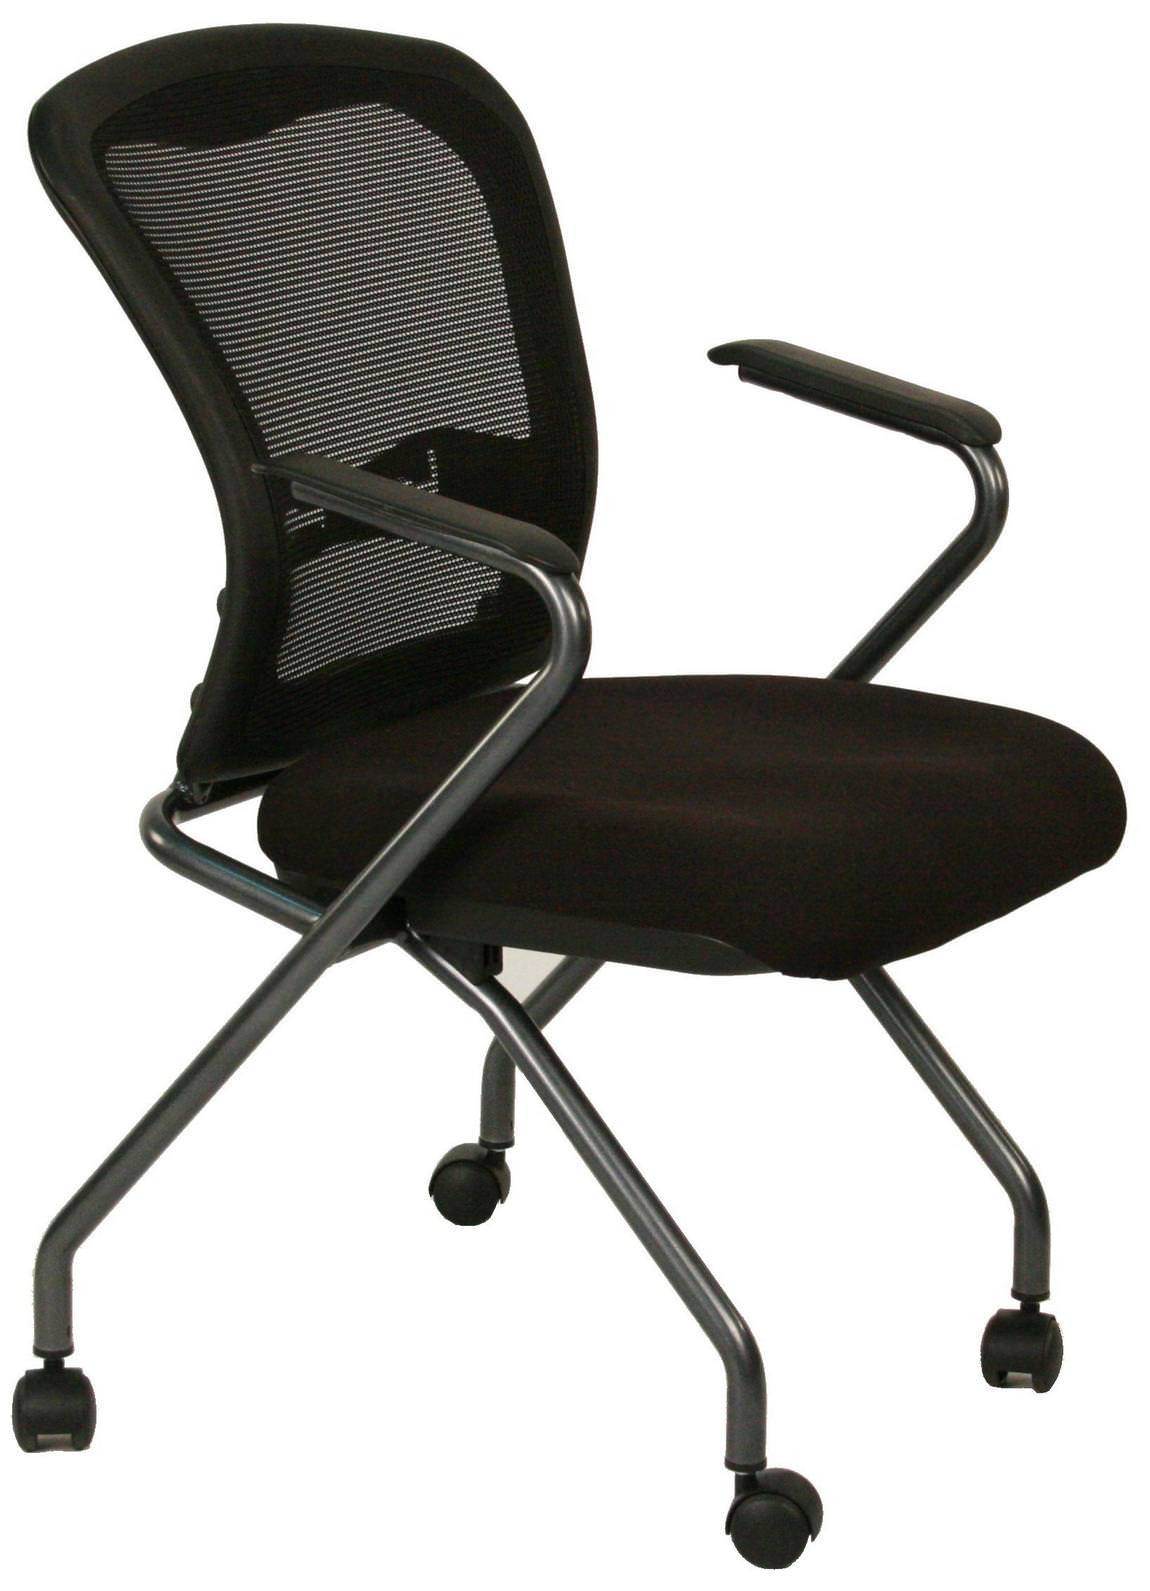 Mesh Back Nesting Chair with Arms